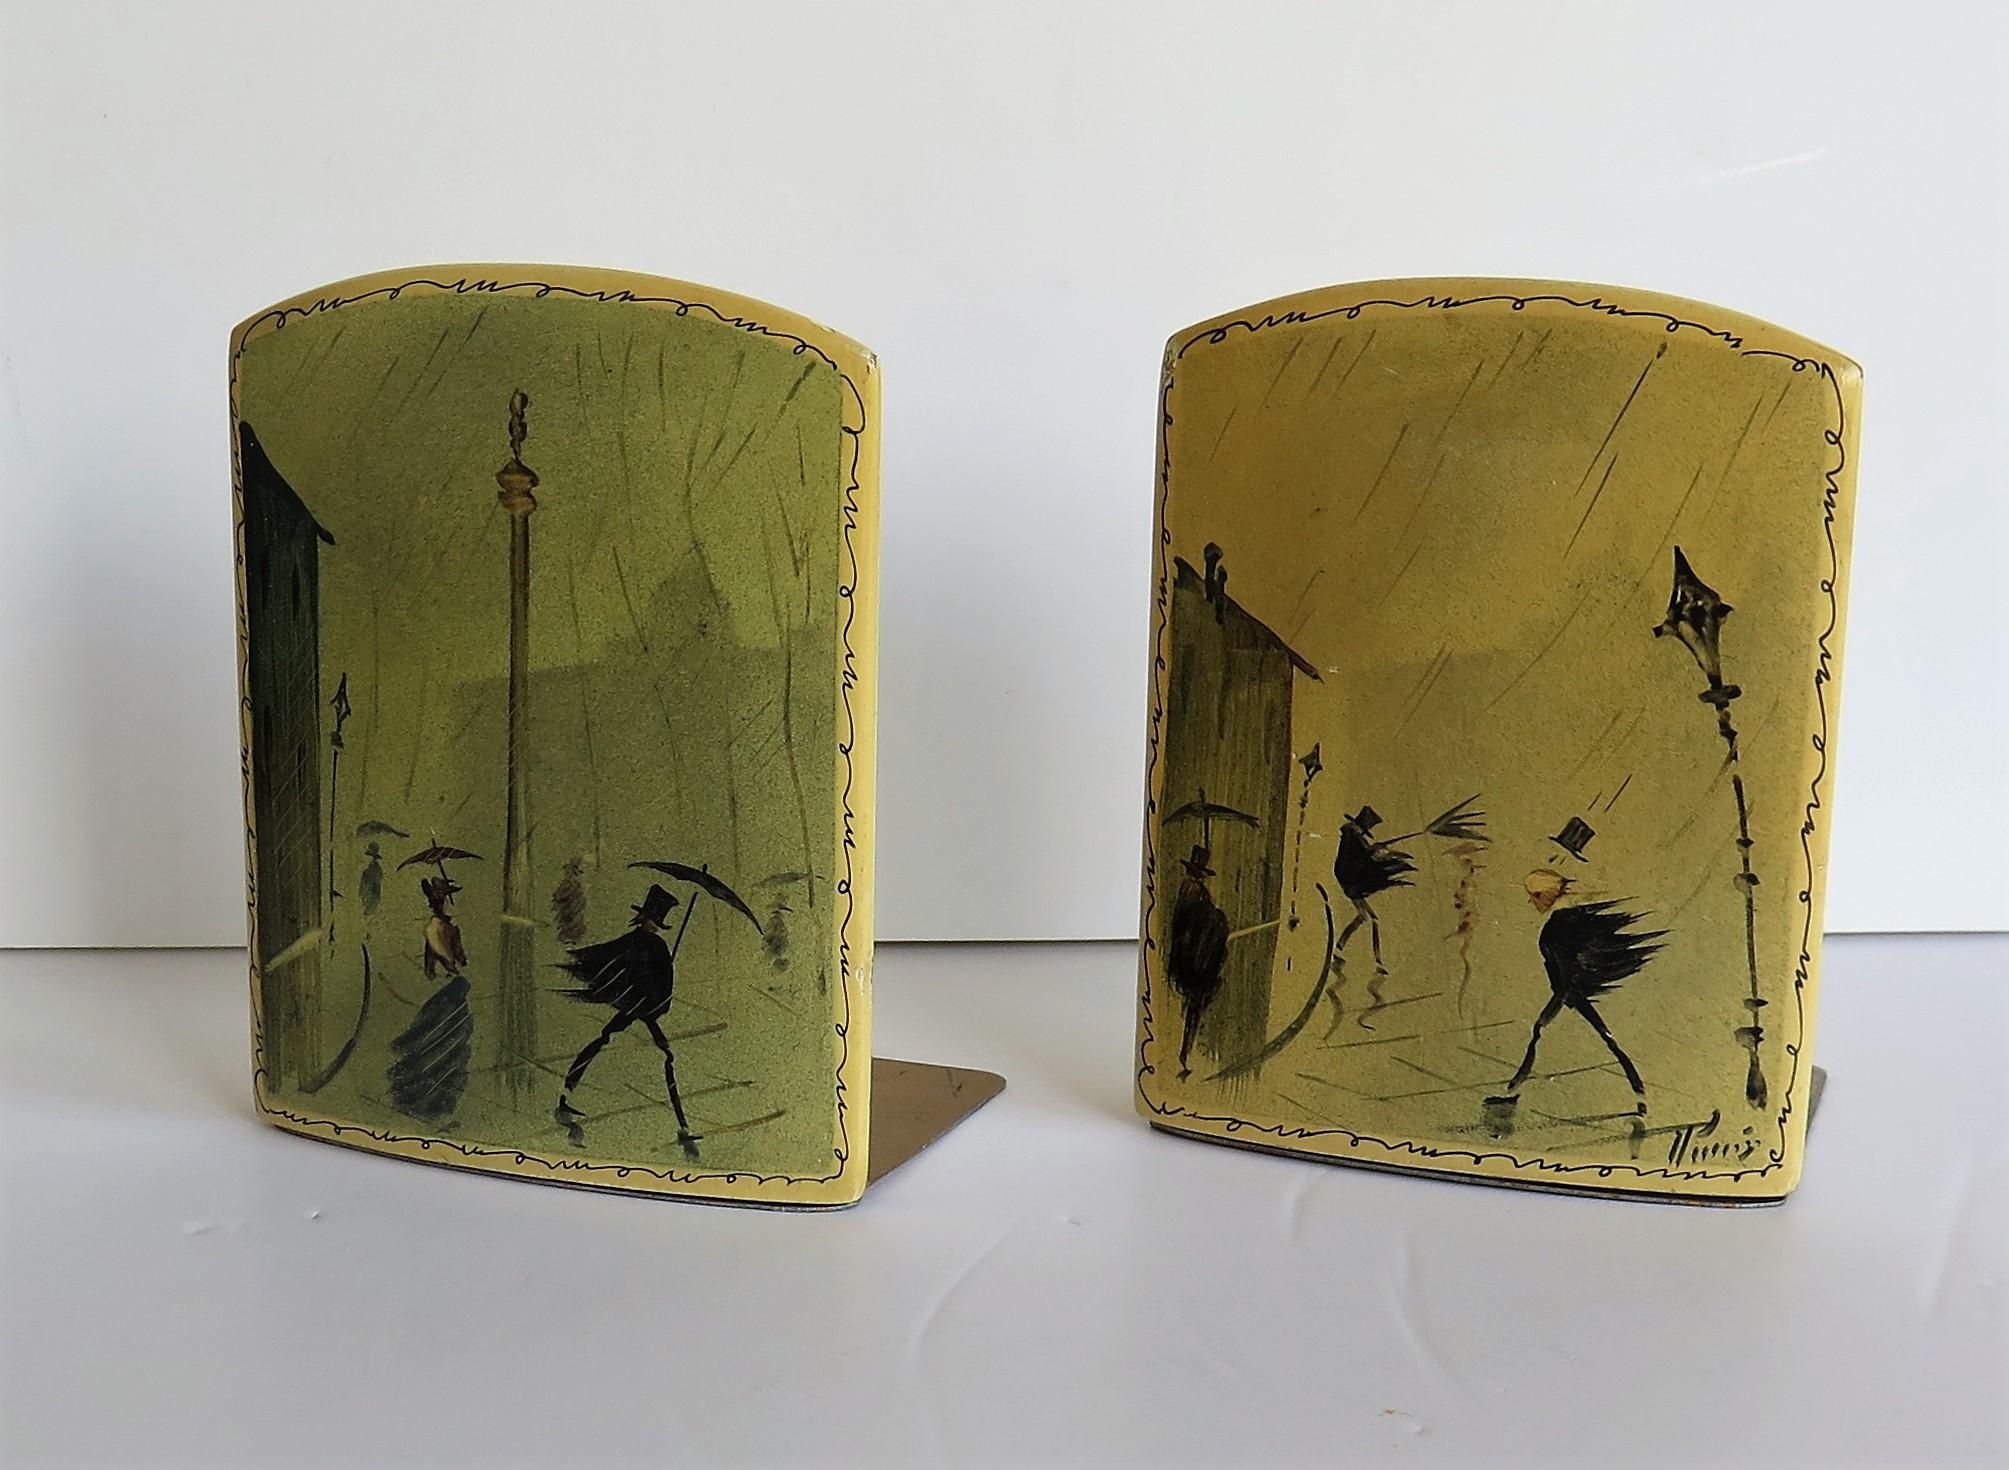 These are a beautiful, rare pair of French book ends, hand painted and signed, which we date to the late 19th century.

Each bookend has a hinged folding metal base section 

The bookends have been beautifully hand painted in a free flowing style,